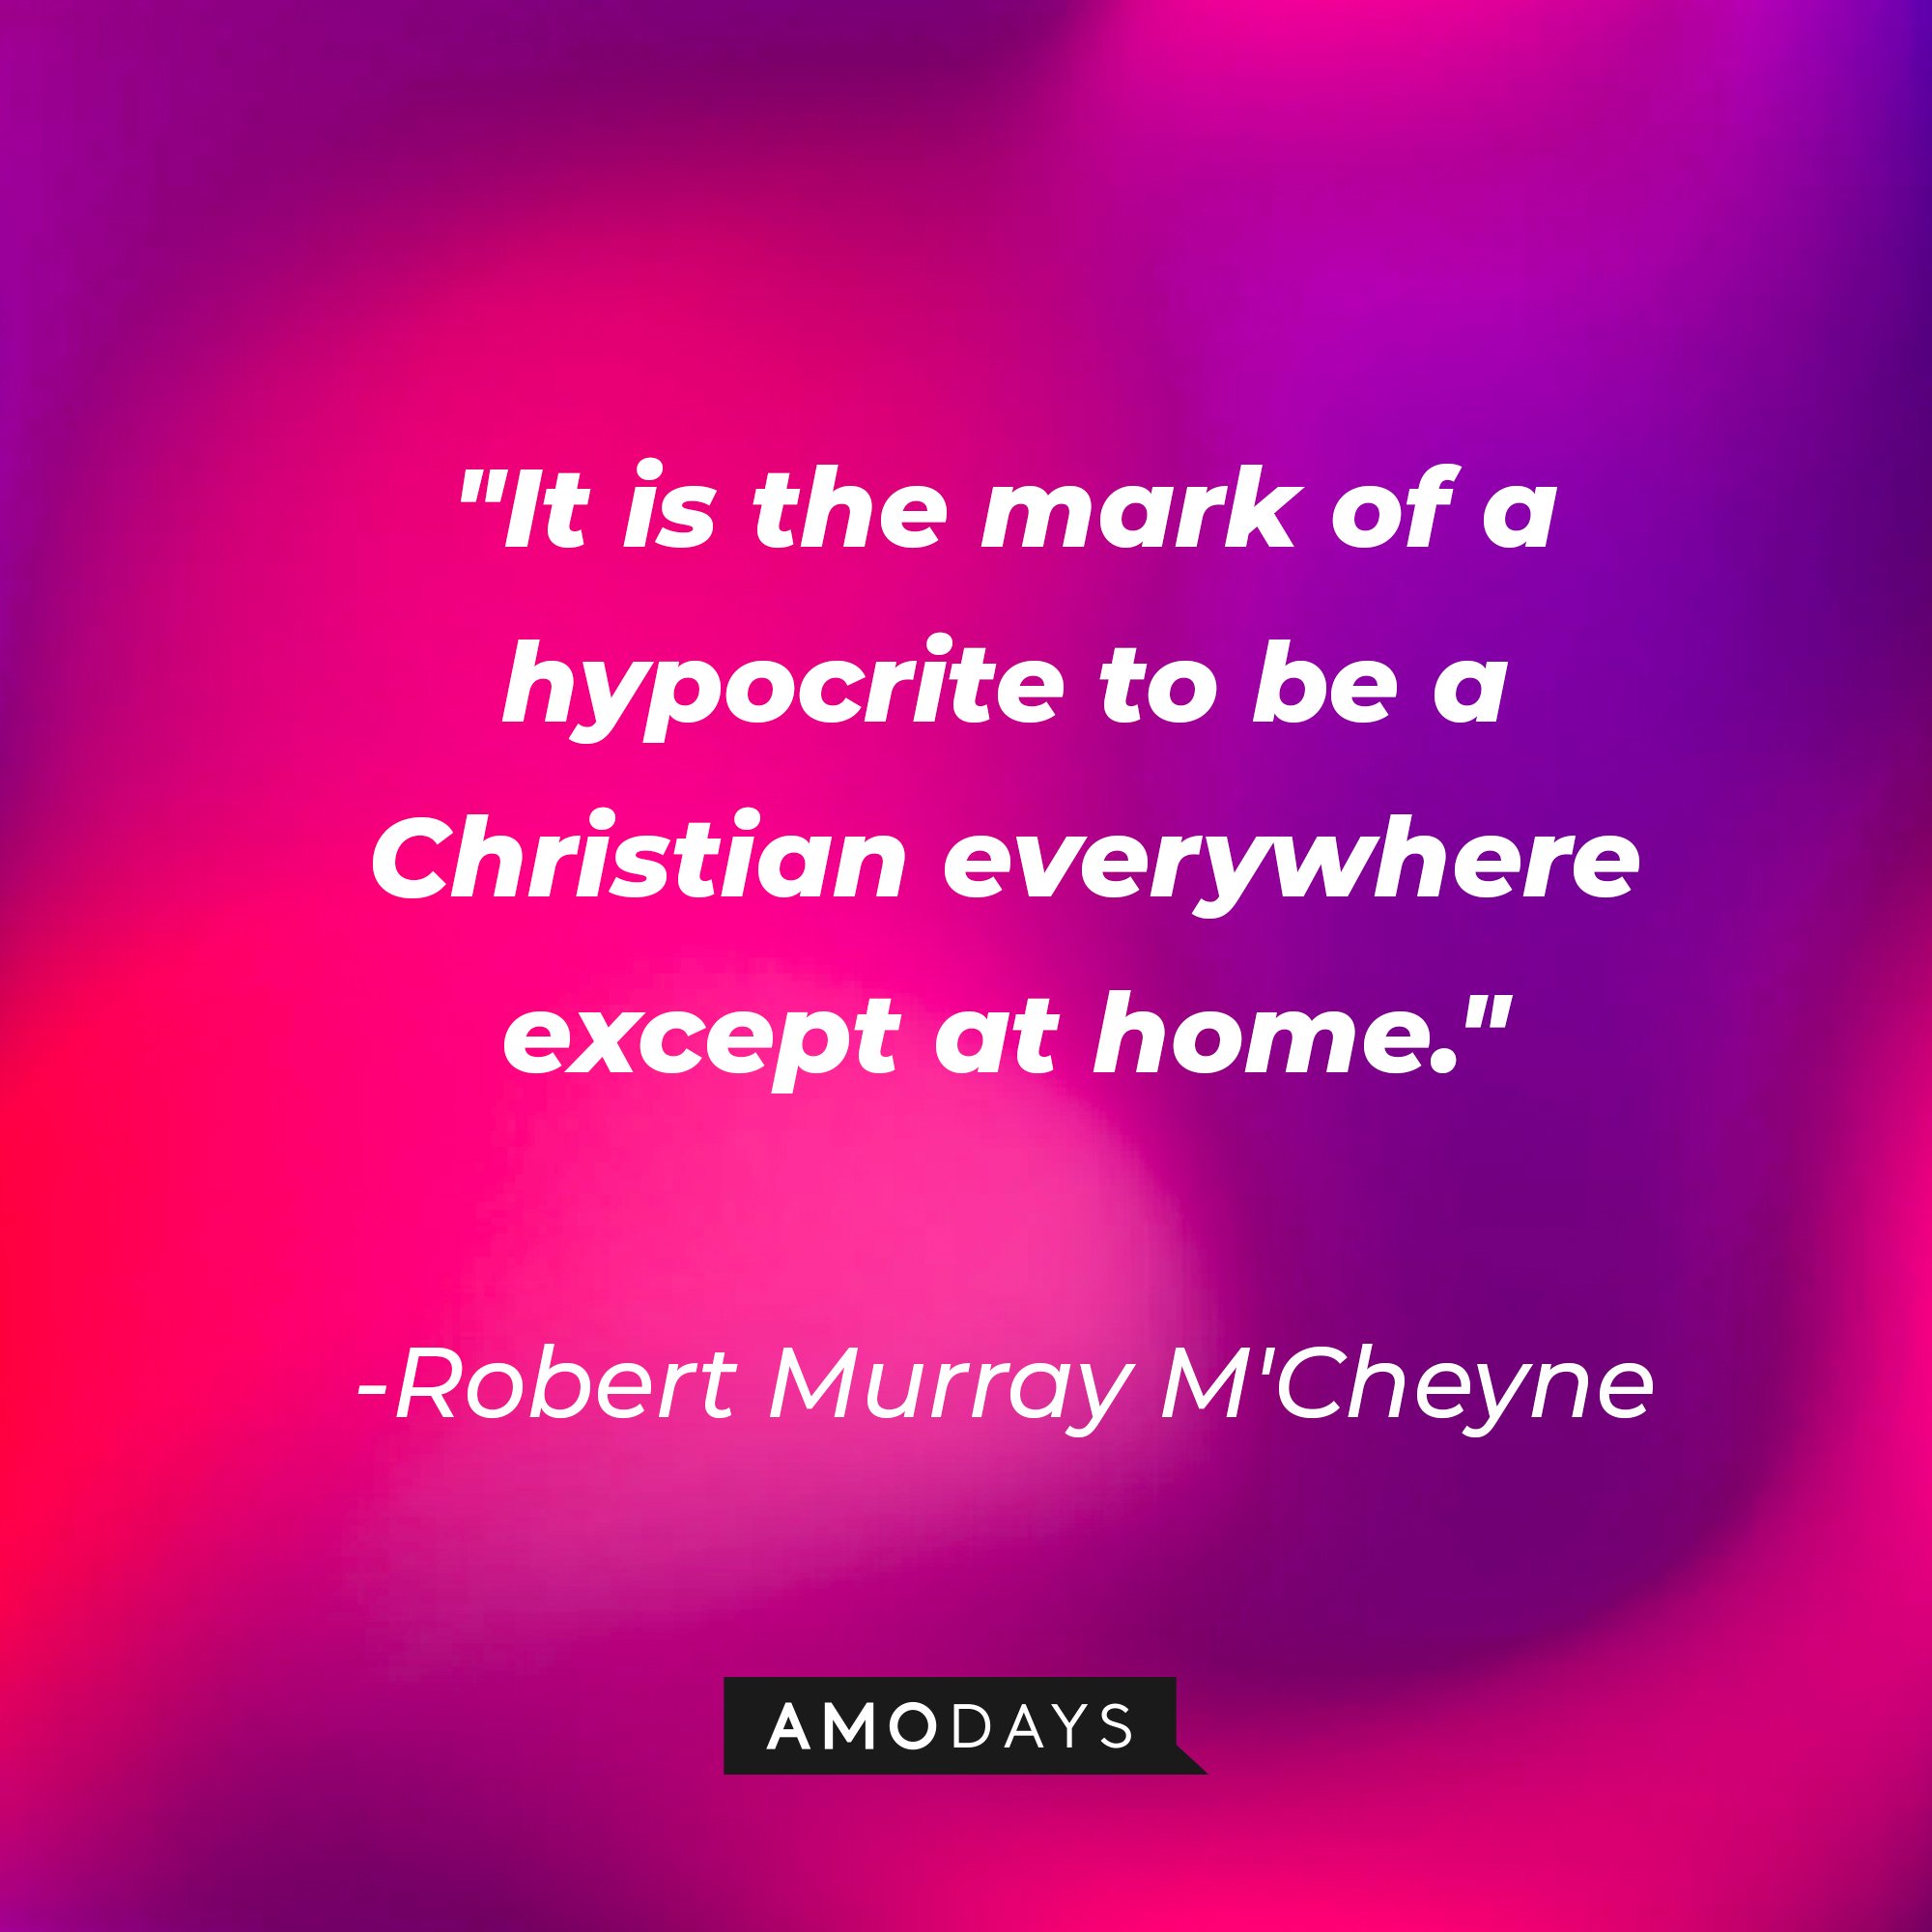 Robert Murray M'Cheyne's quote:\\\\\\\\\\\\\\\\u00a0"It is the mark of a hypocrite to be a Christian everywhere except at home."\\\\\\\\\\\\\\\\u00a0| Image: AmoDays